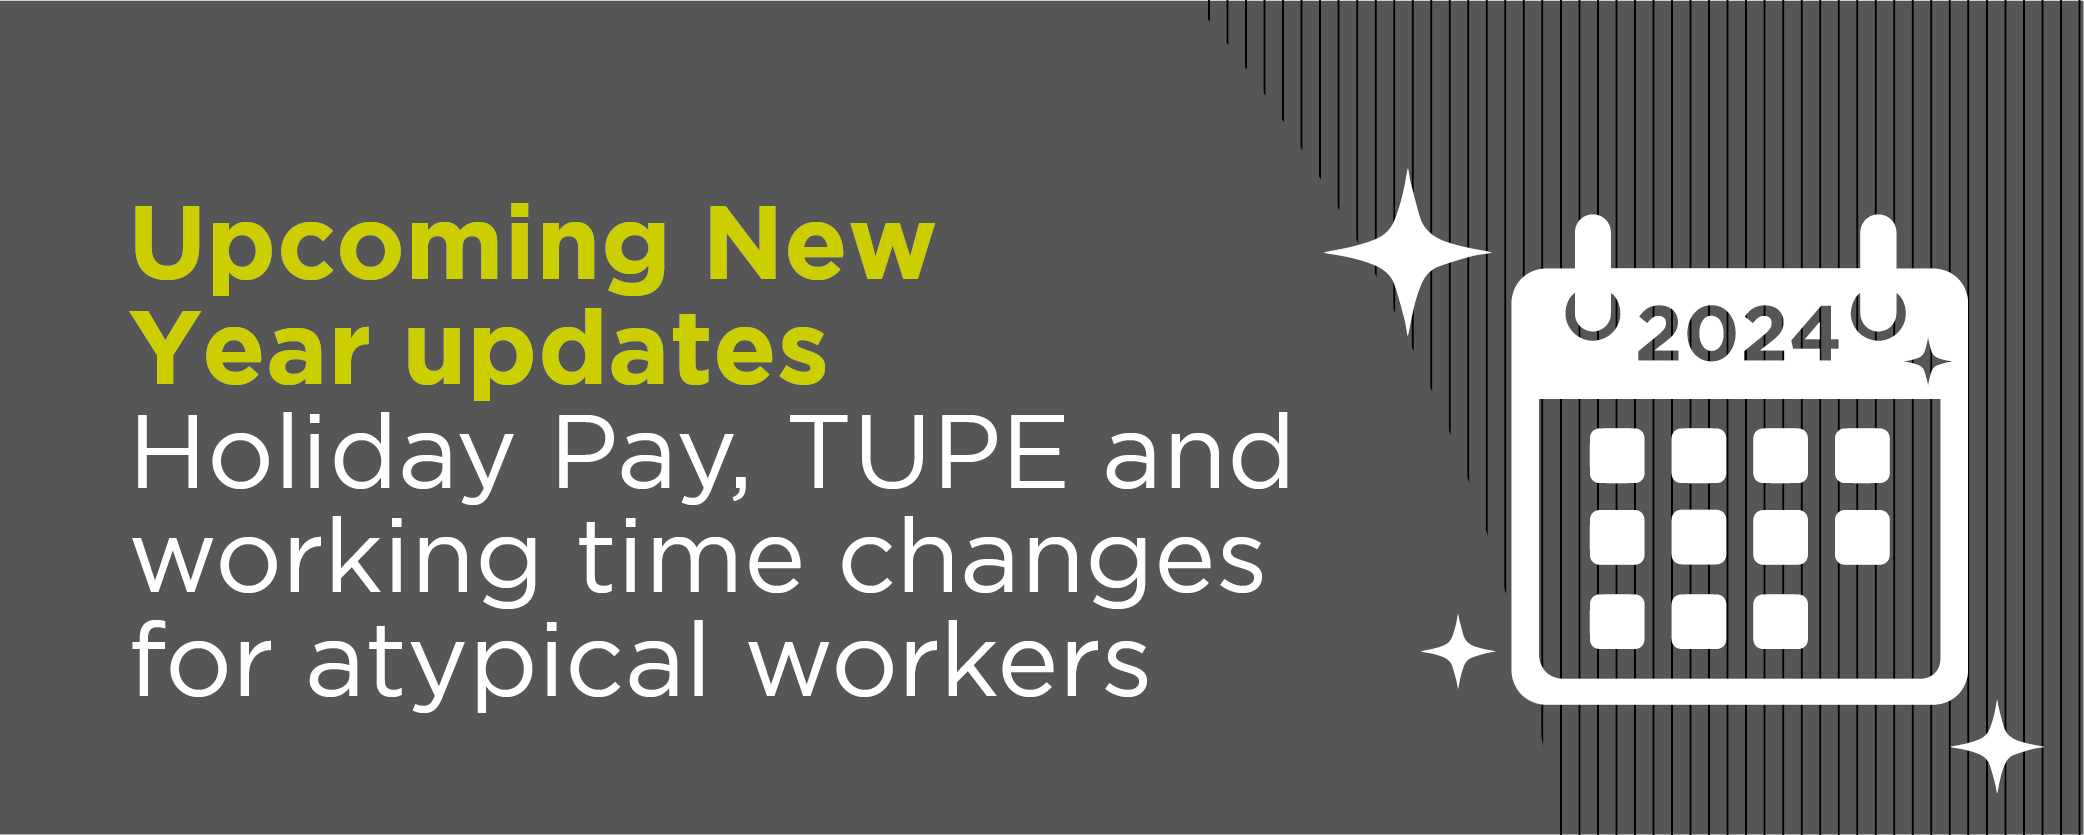 Upcoming New Year updates: Holiday Pay, TUPE and working time changes for atypical workers